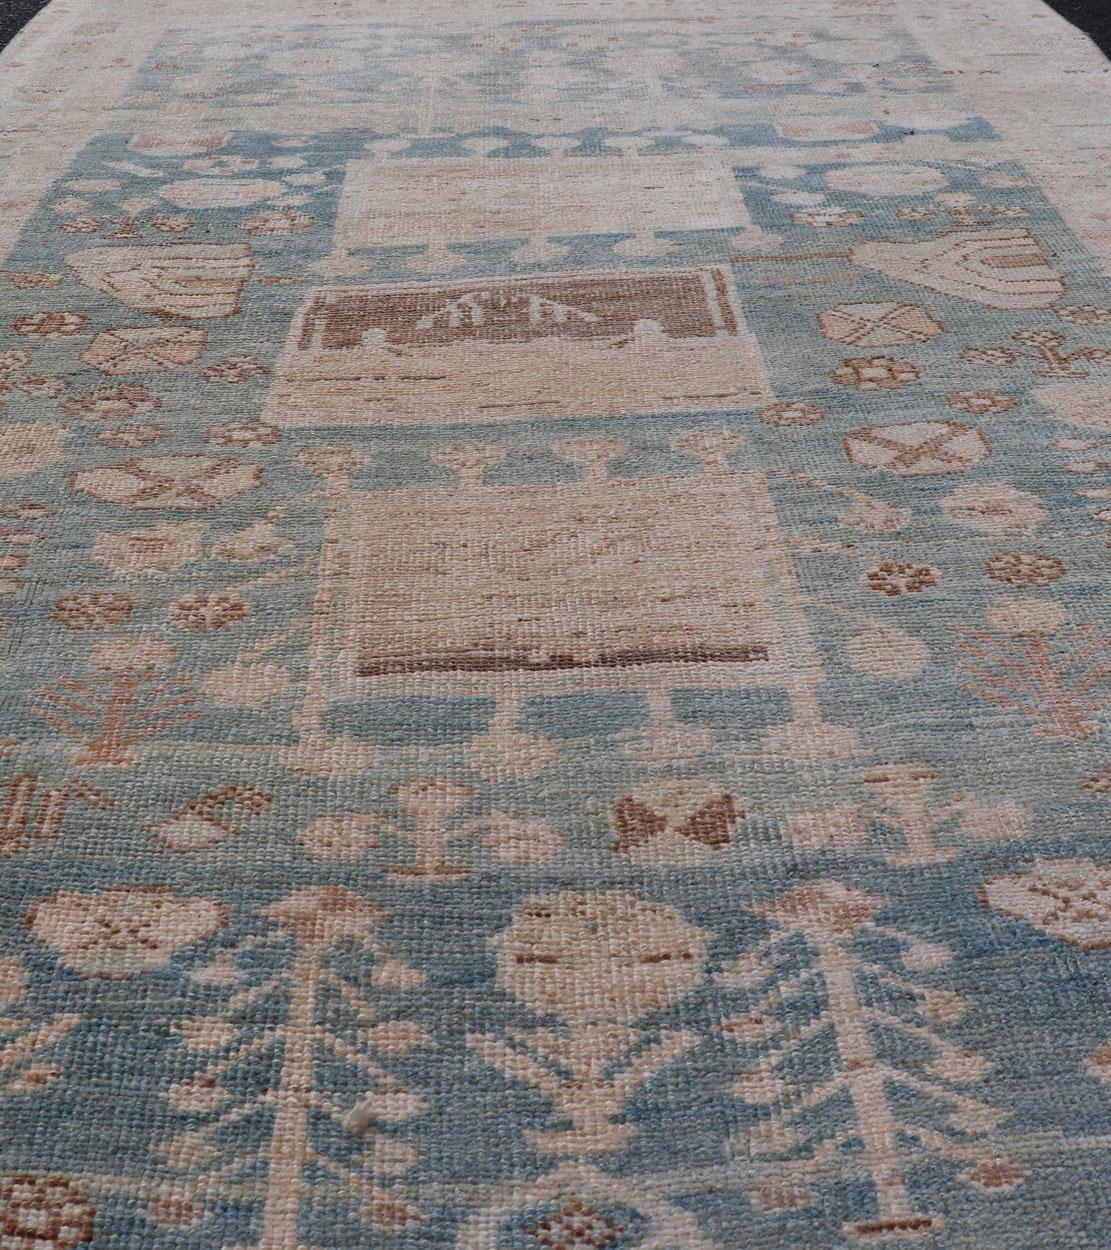 Persian Kurdish Antique Rug with Tribal Design in Light Blue, Teal, and Cream For Sale 1